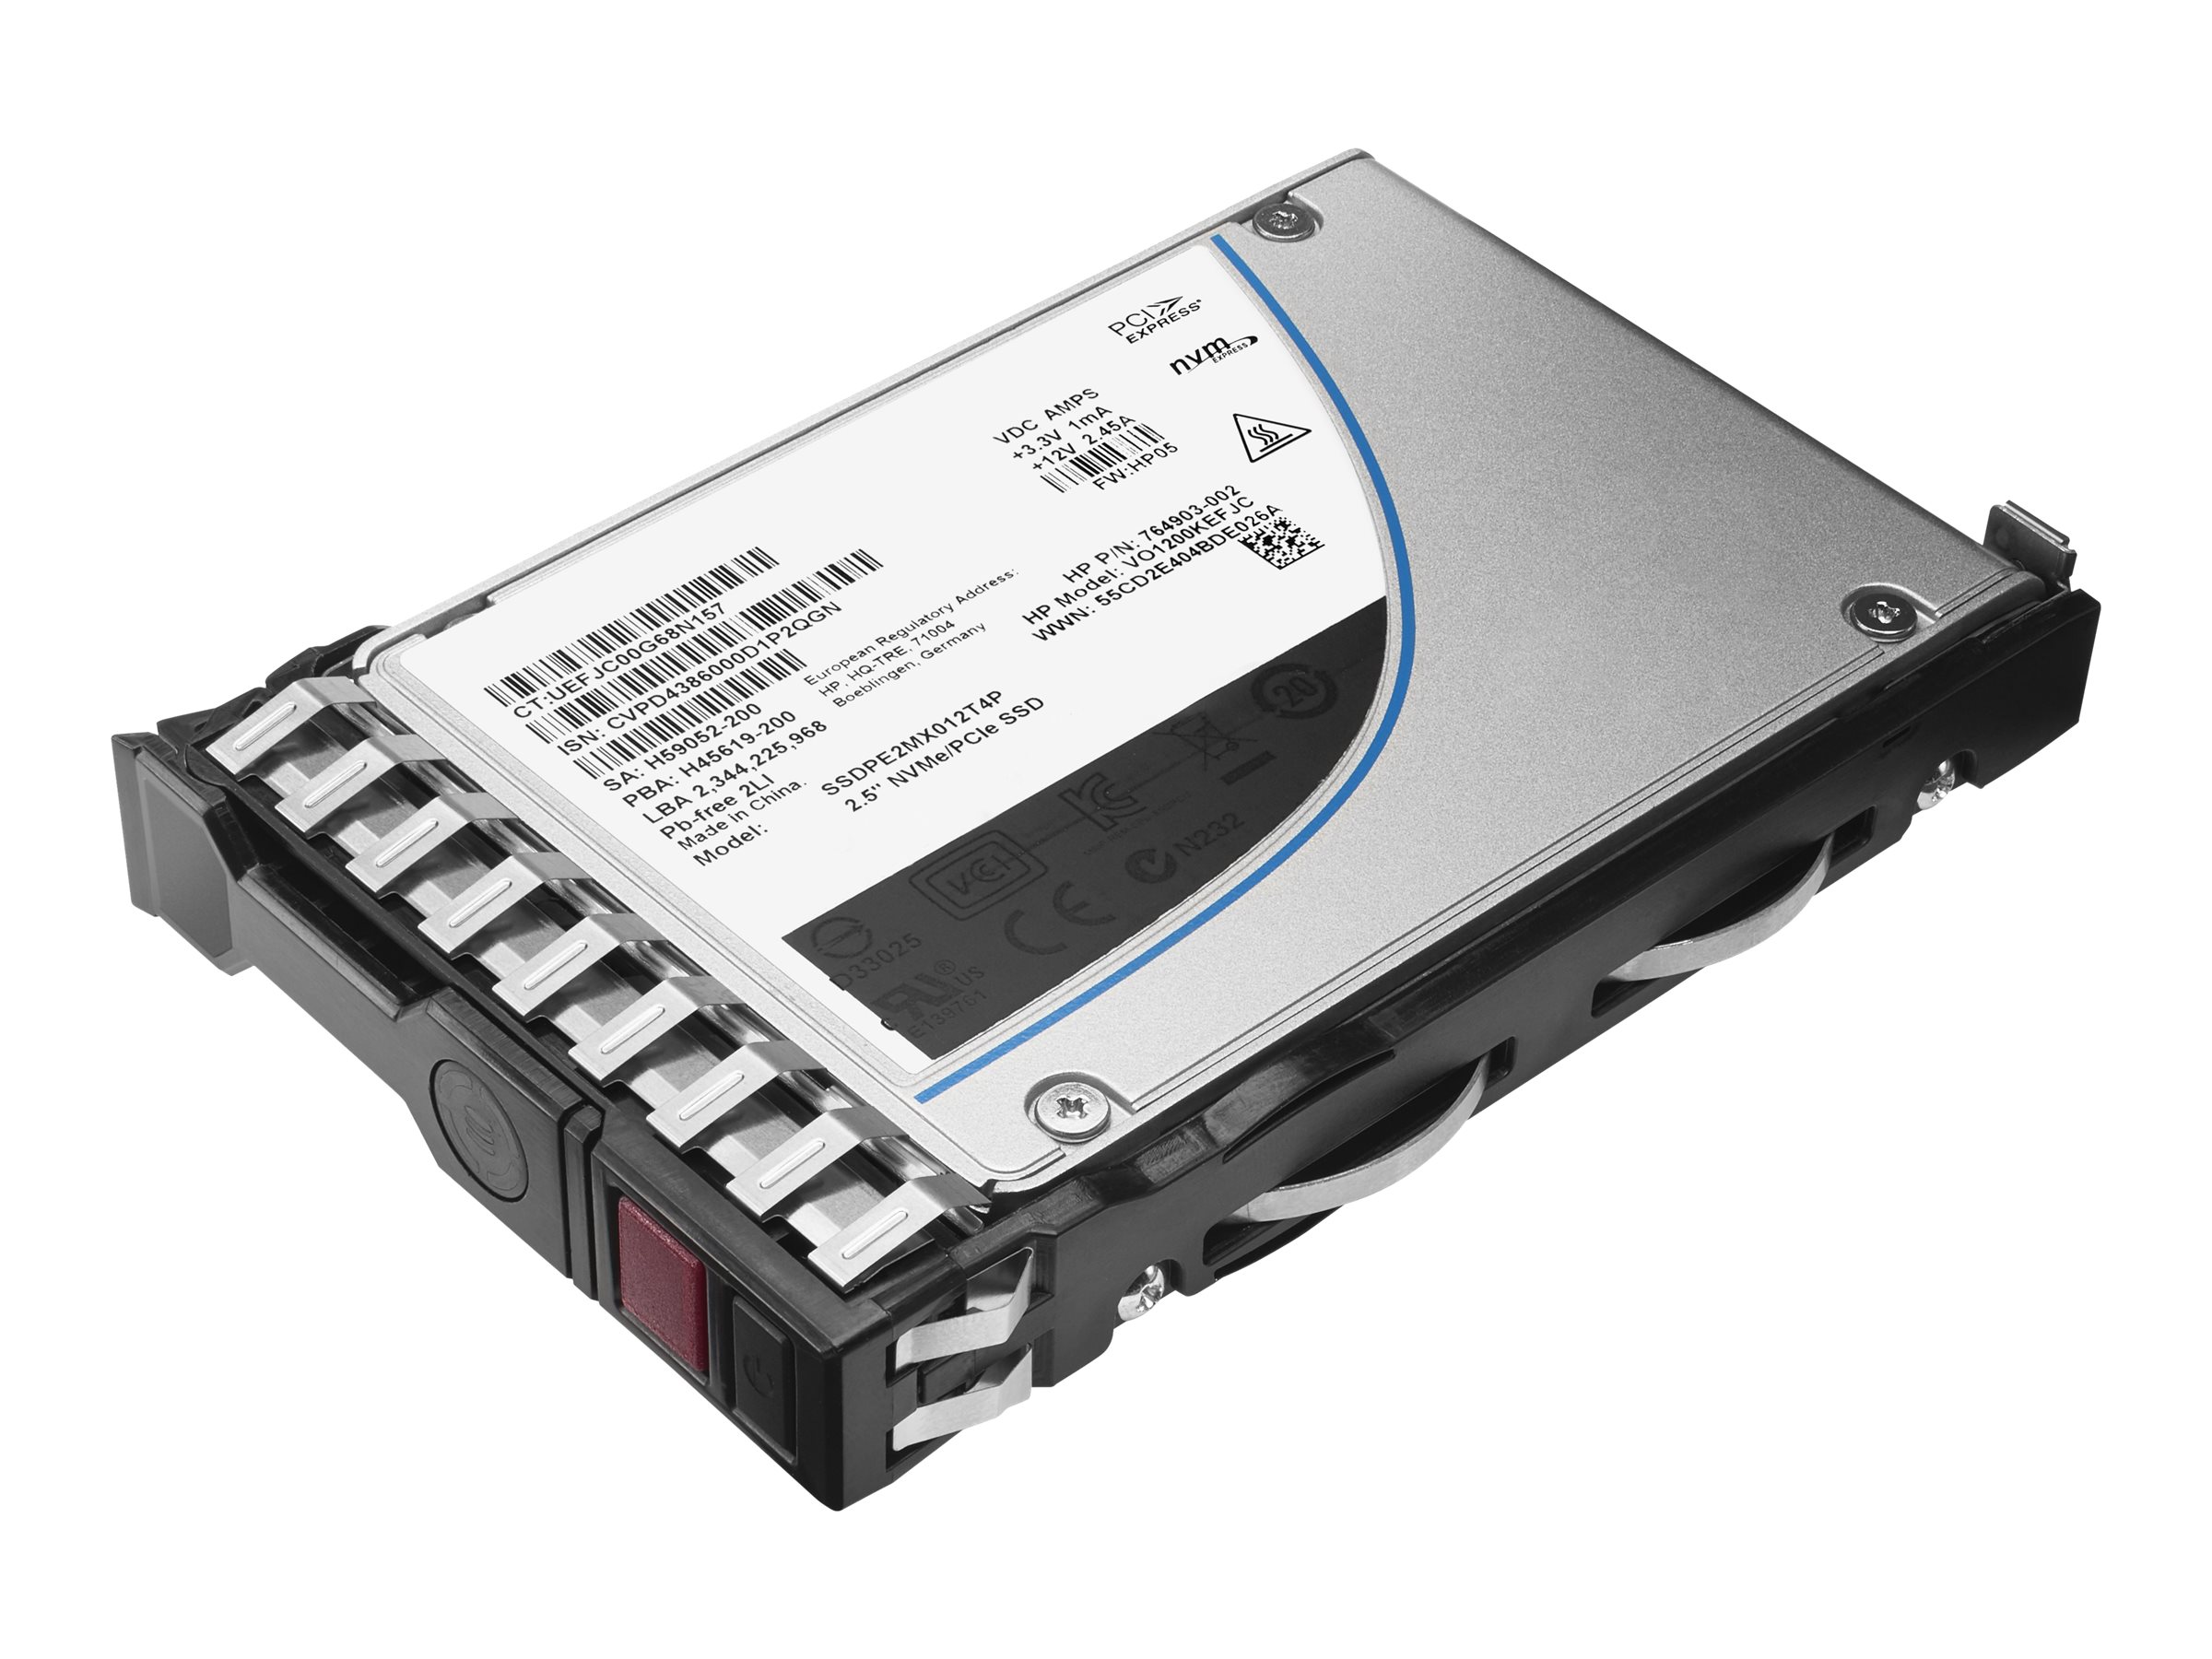 HPE Mixed Use-2 - SSD - 480 GB - Hot-Swap - 3.5